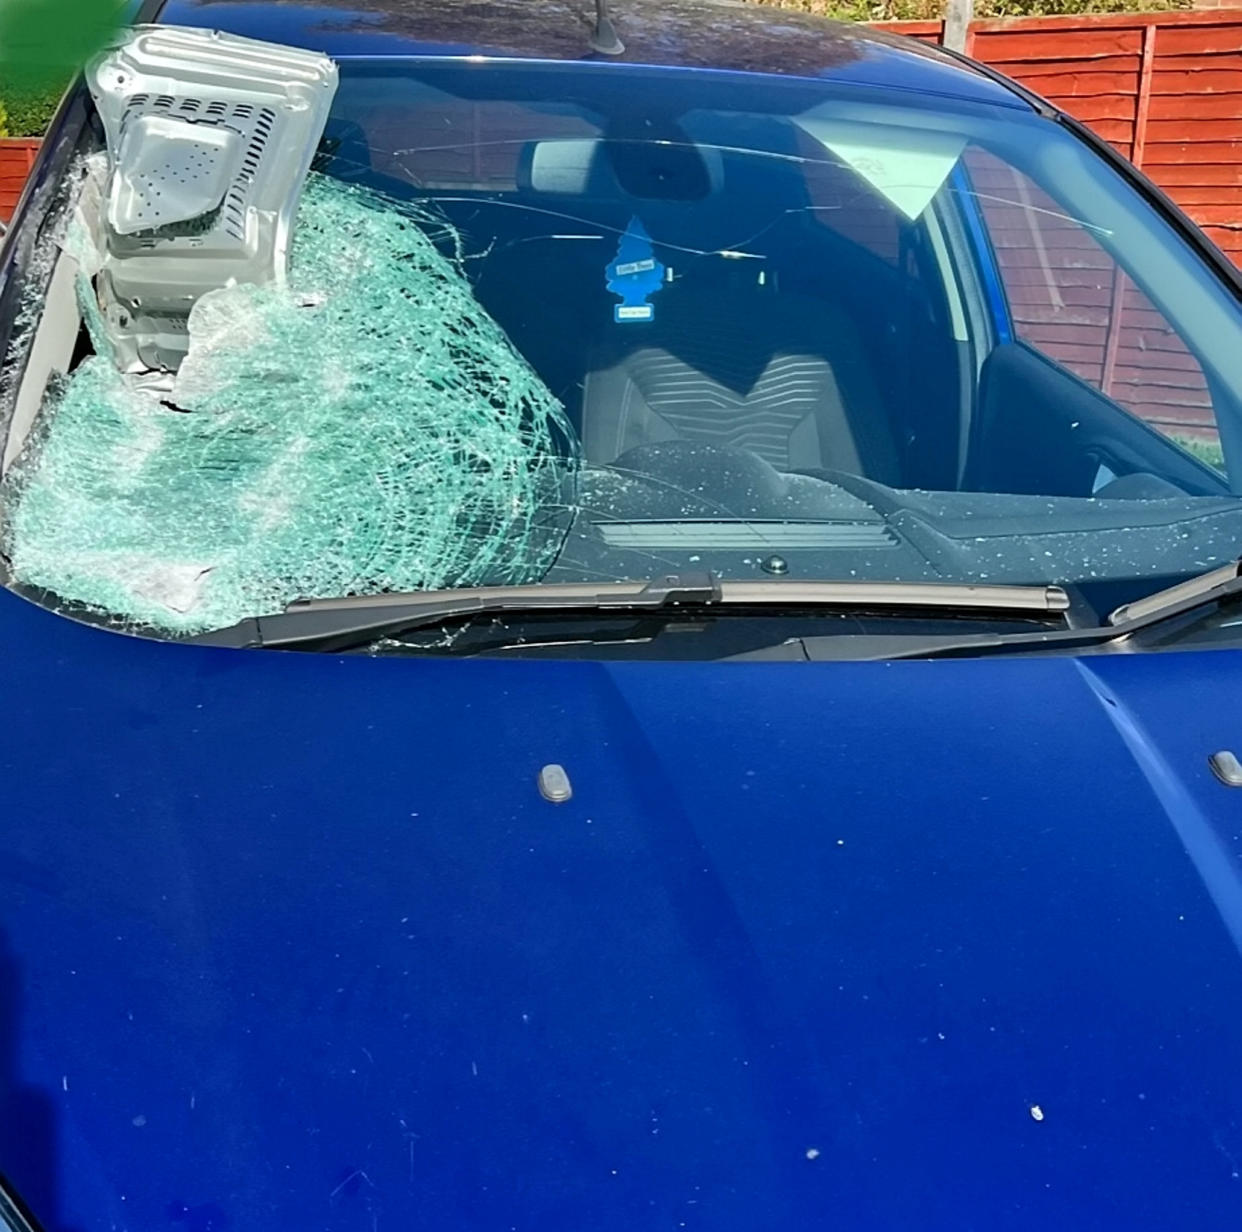 Two people on a moped who hurled a microwave at the windscreen of the oncoming car are being hunted. (SWNS)

 